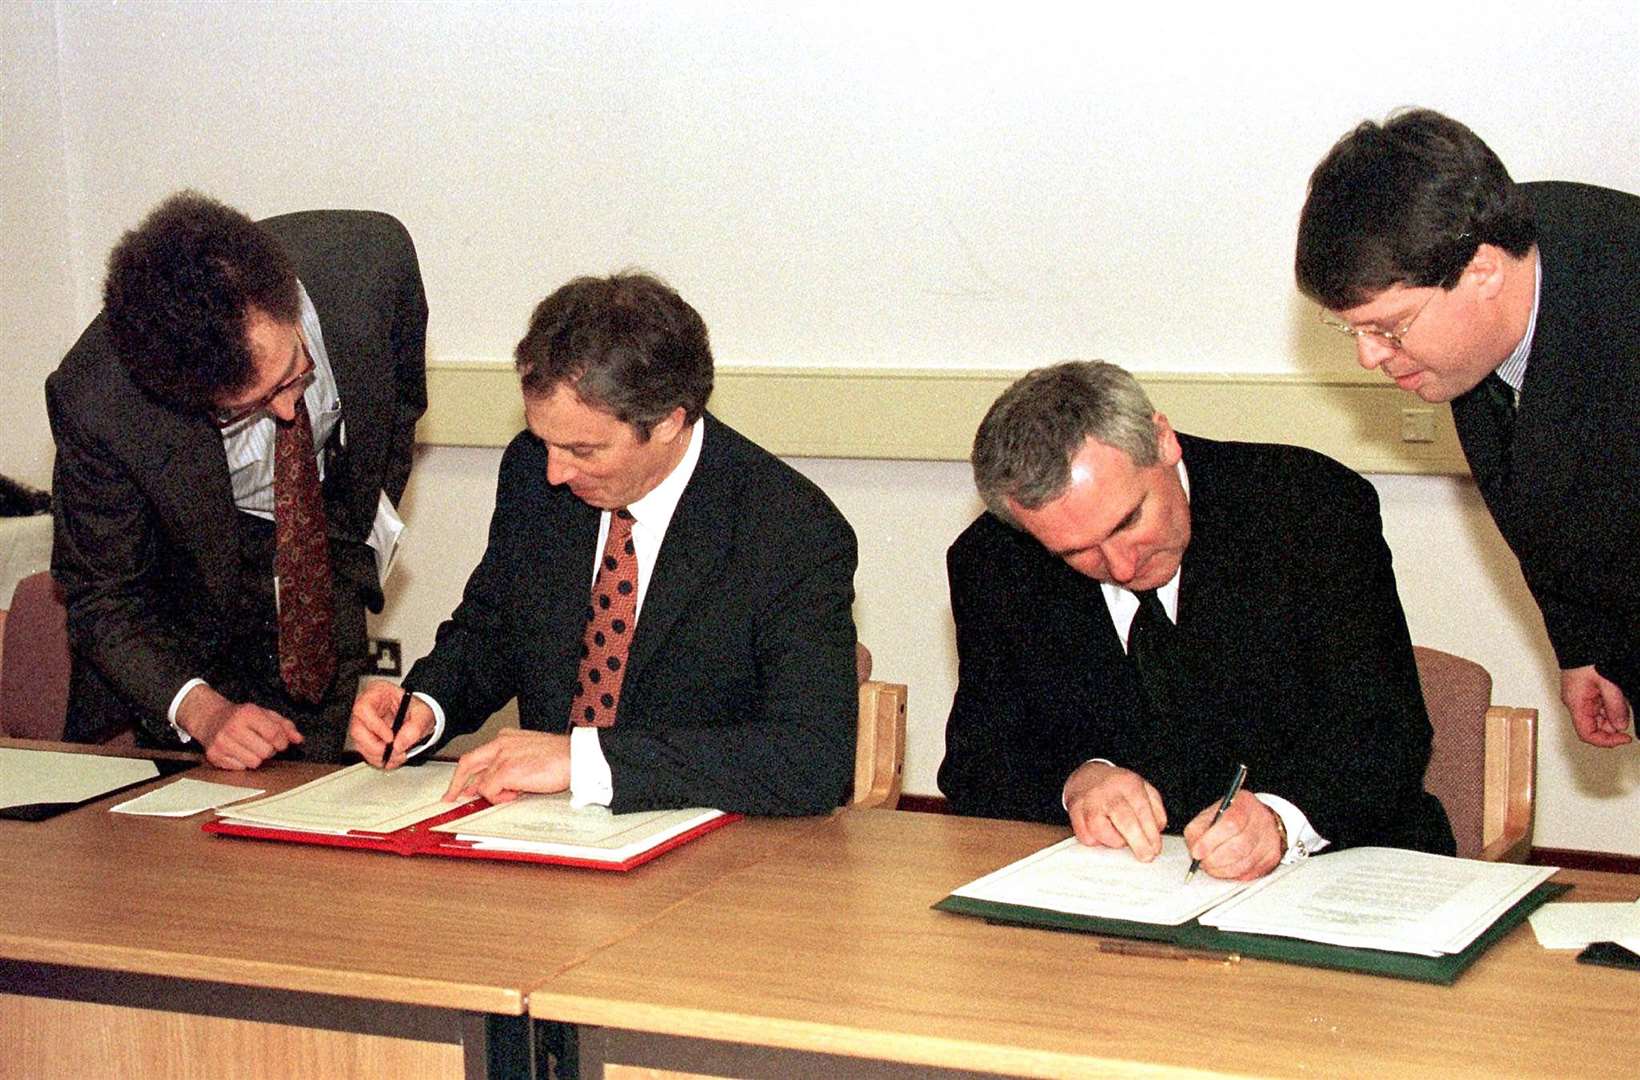 Tony Blair and Bertie Ahern signing the historic Good Friday peace agreement in 1998 (John Giles/PA)